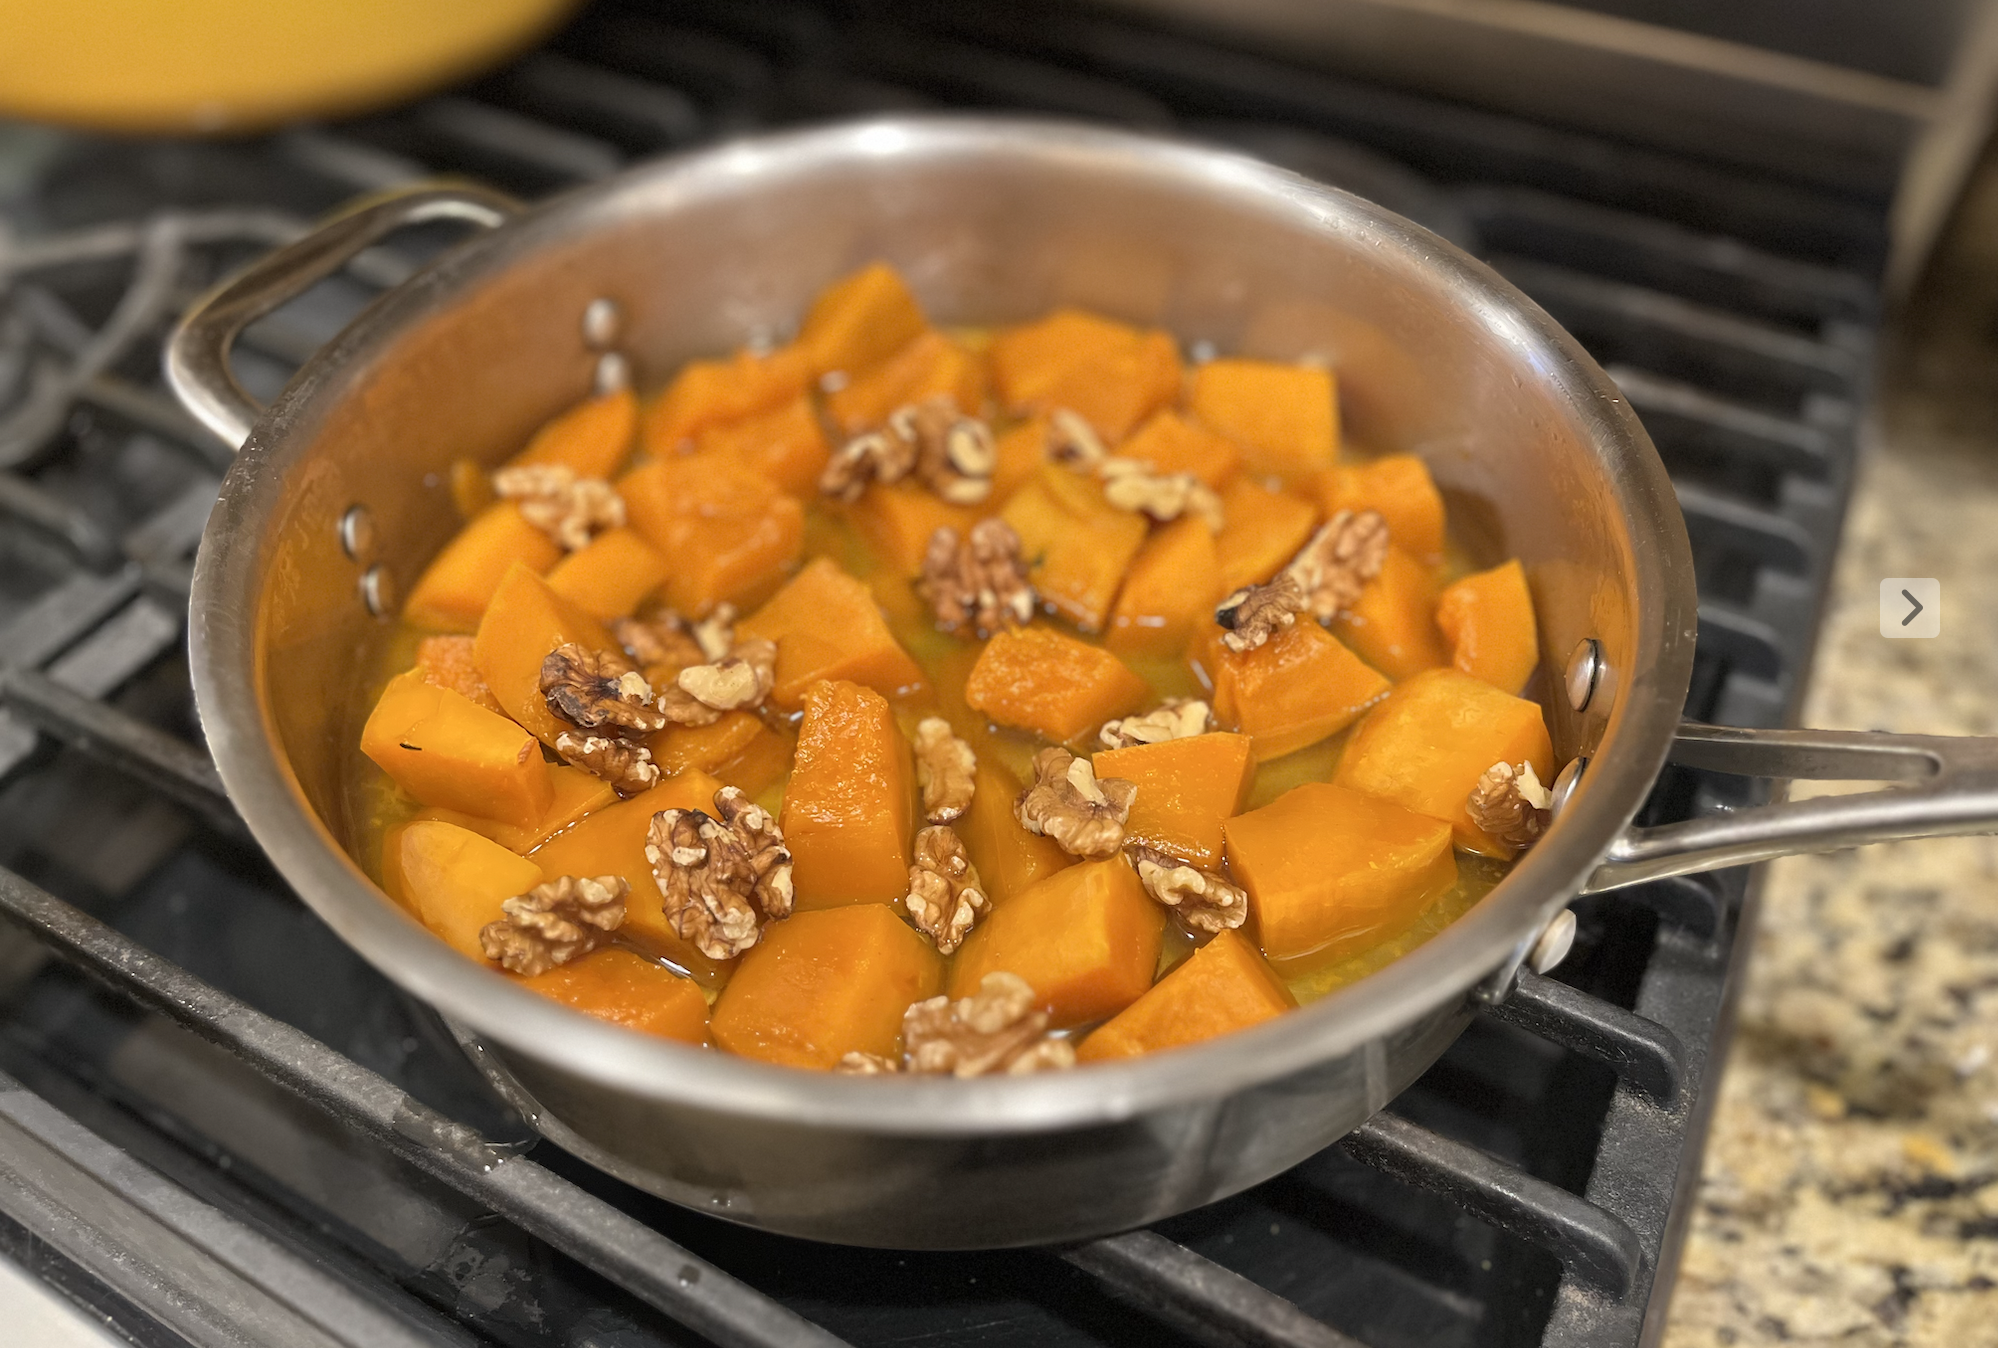 cubed pumpkin poached in syrup with walnuts on a stove